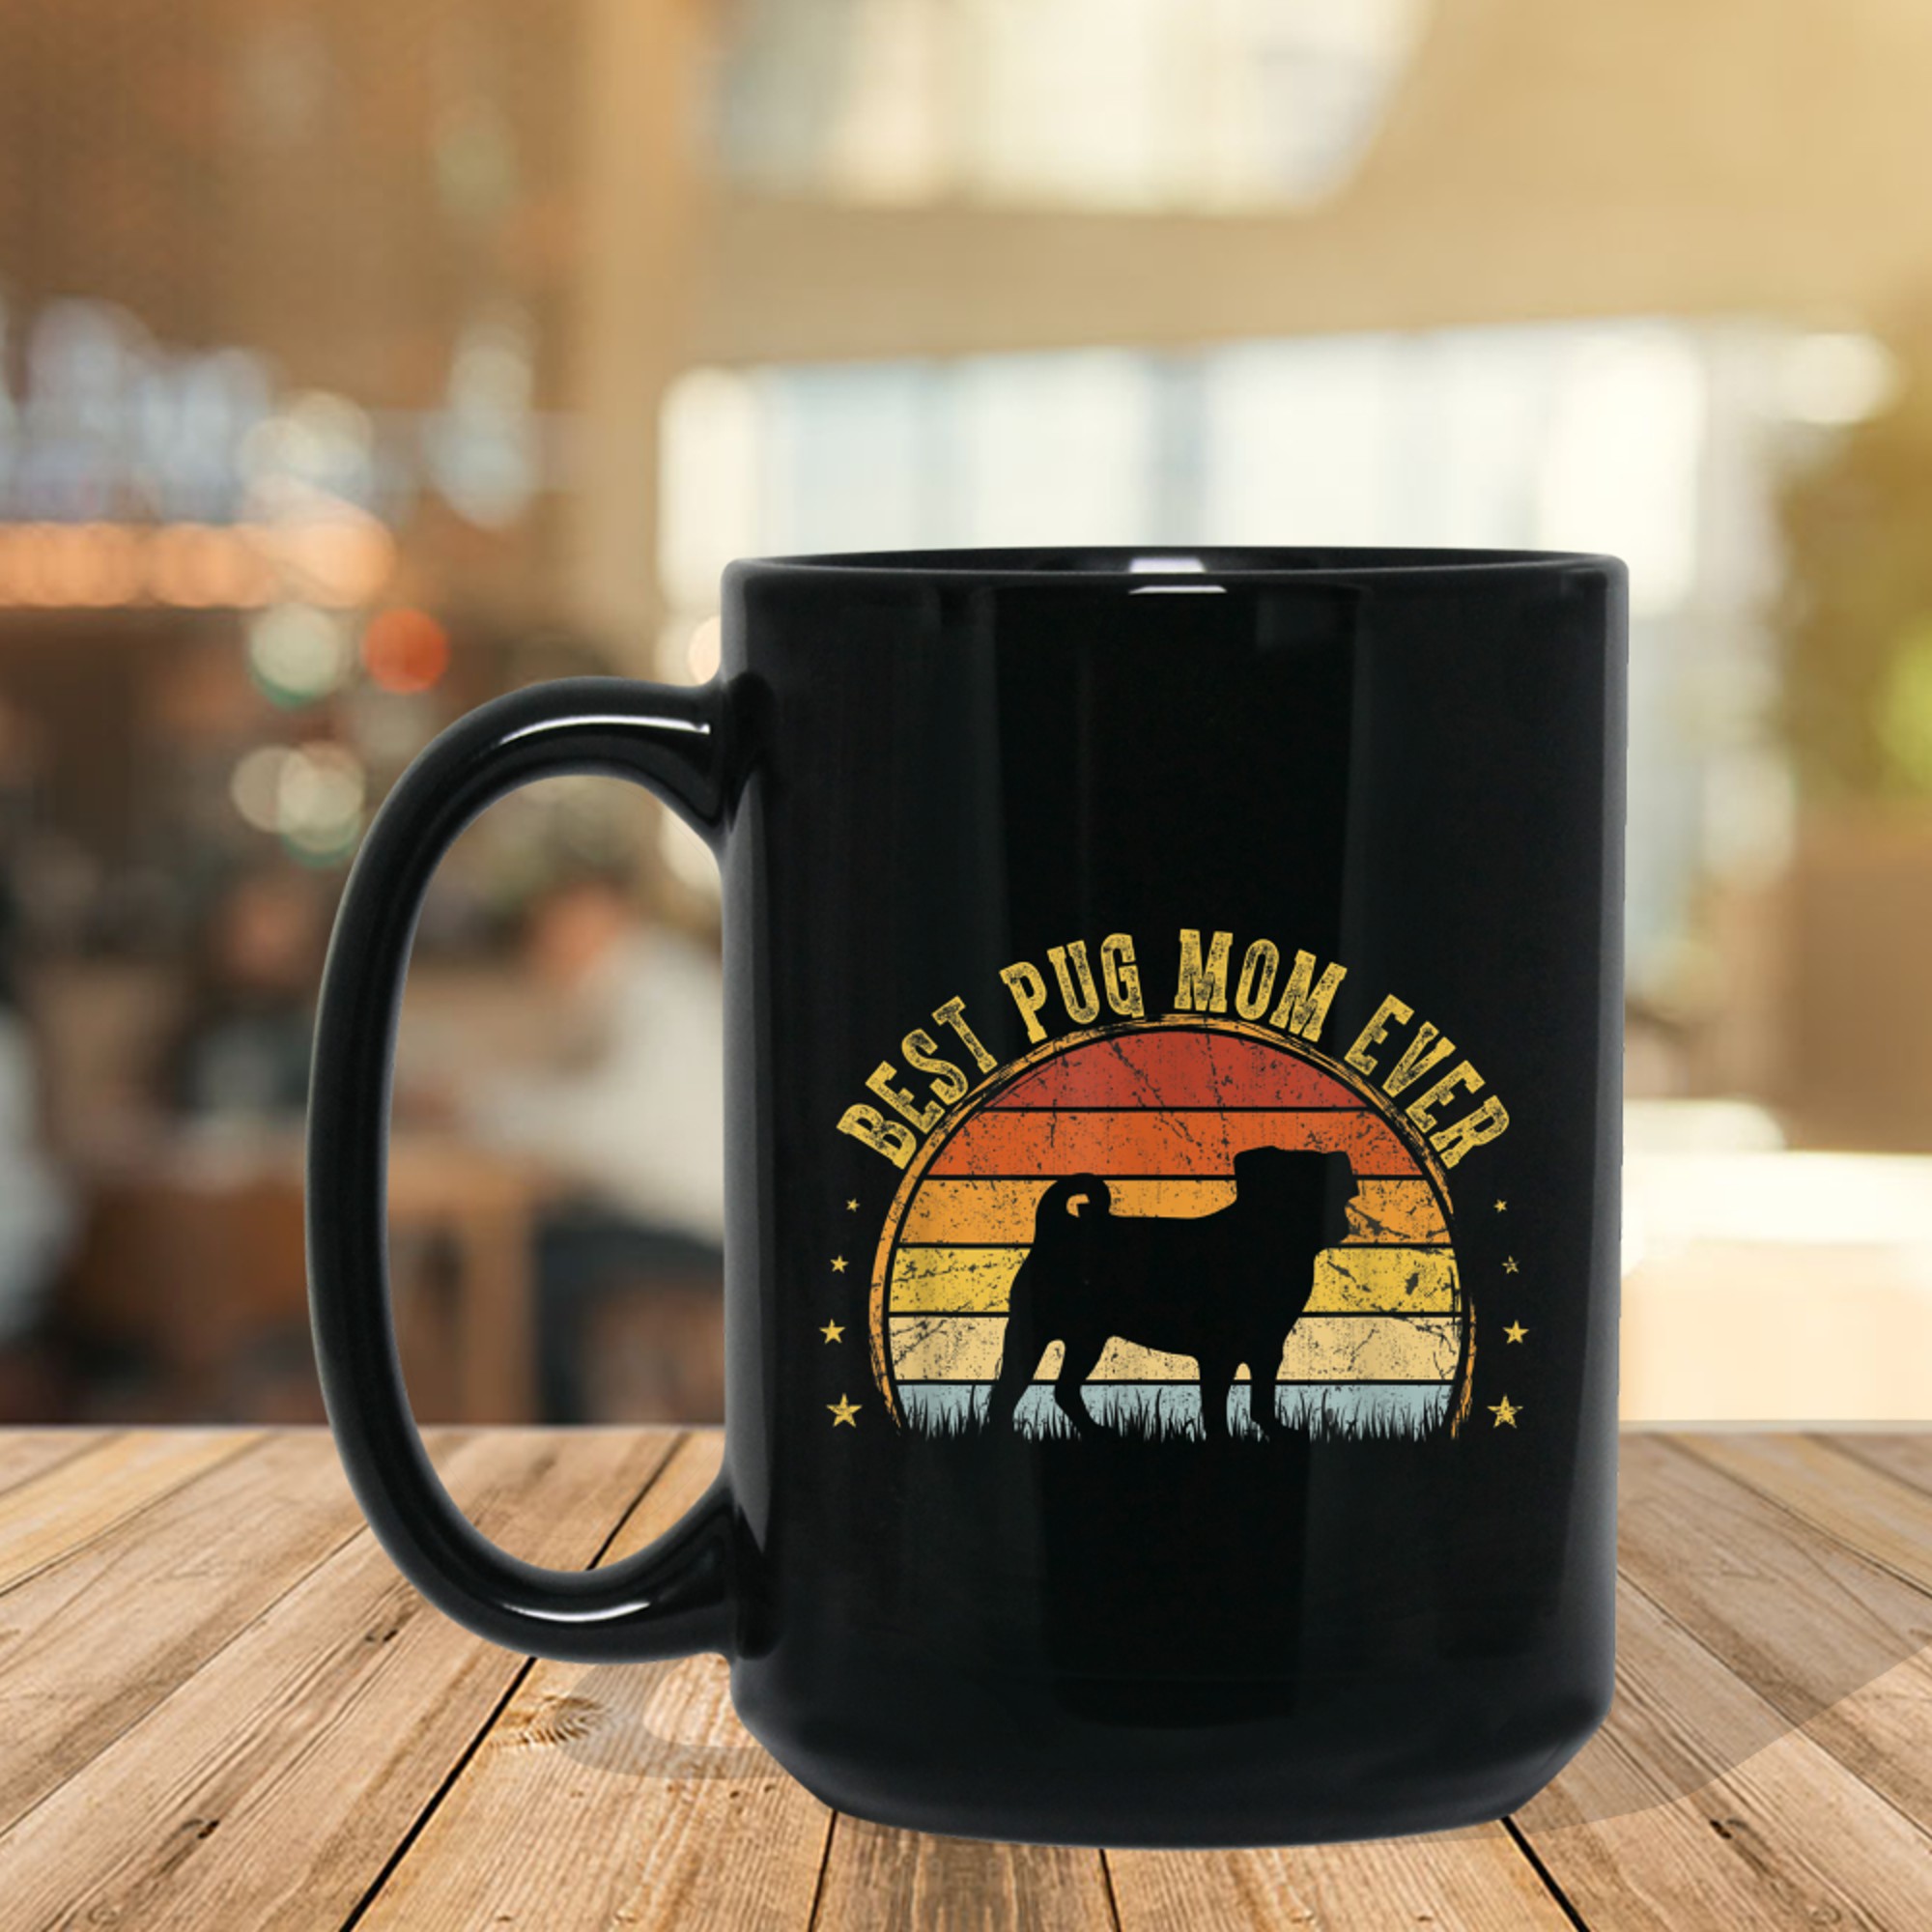 Best Pug Mom Ever Outfit Mother's Day Gifts mug black